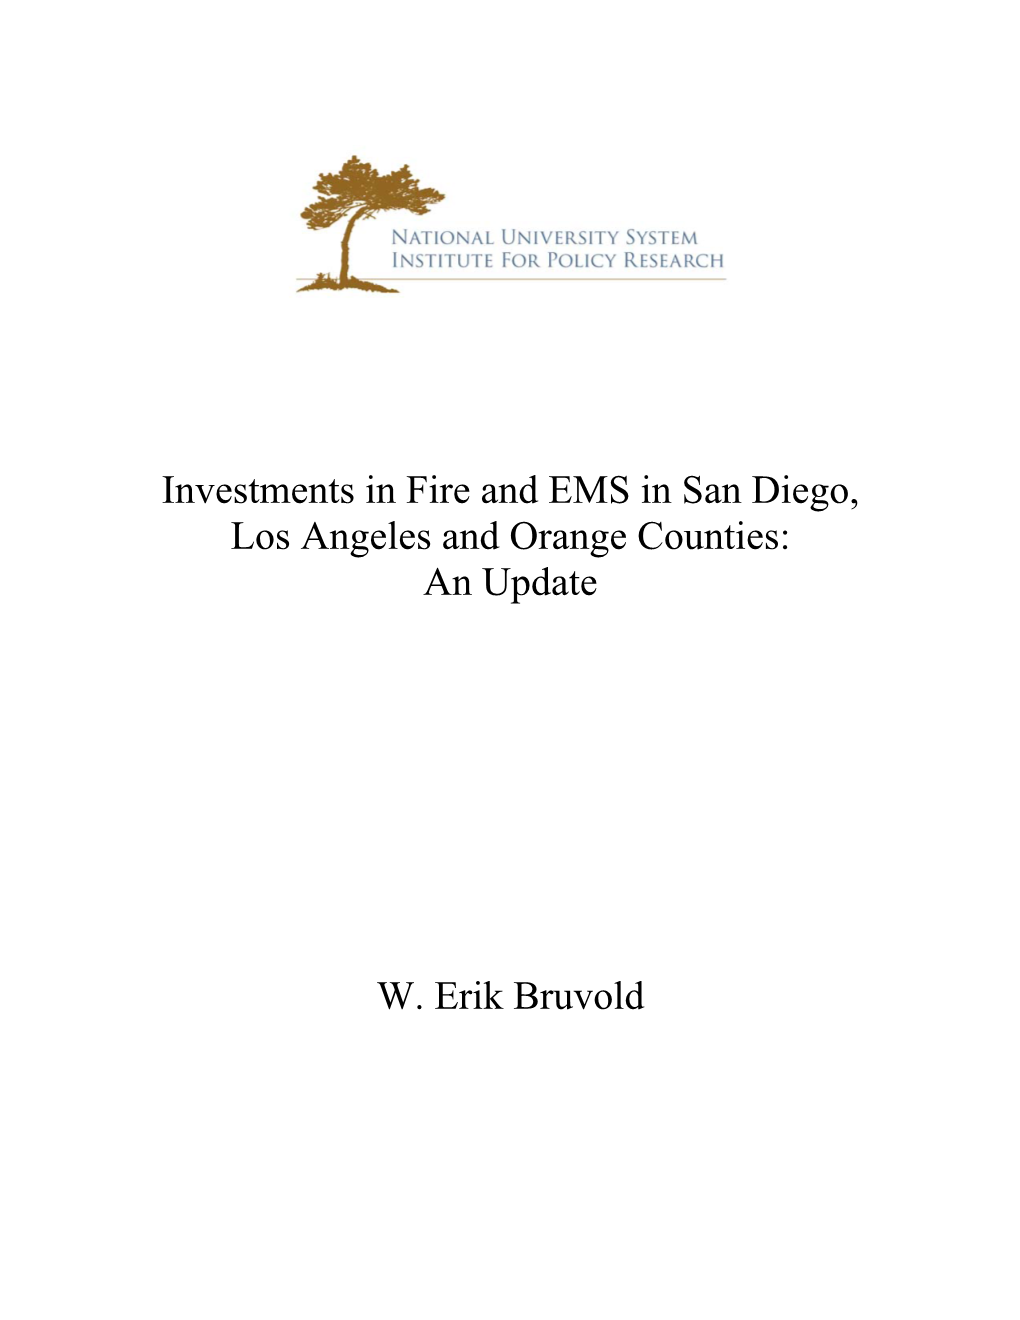 Investments in Fire and EMS in San Diego, Los Angeles and Orange Counties: an Update